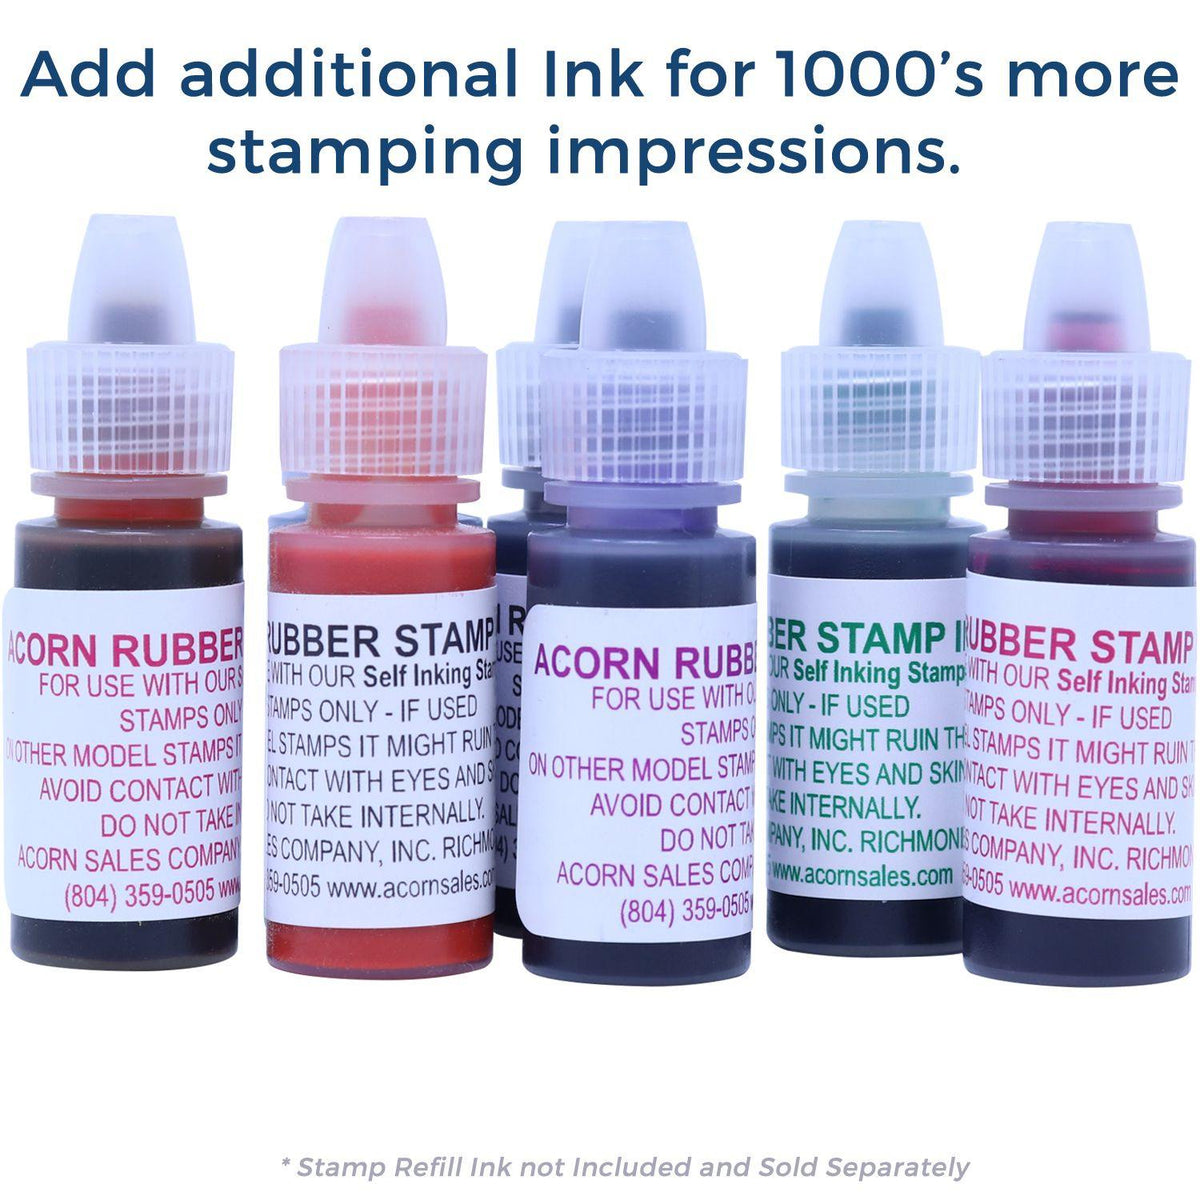 Refill Inks for Large Pre-Inked Cleaned and Sanitized Stamp Available